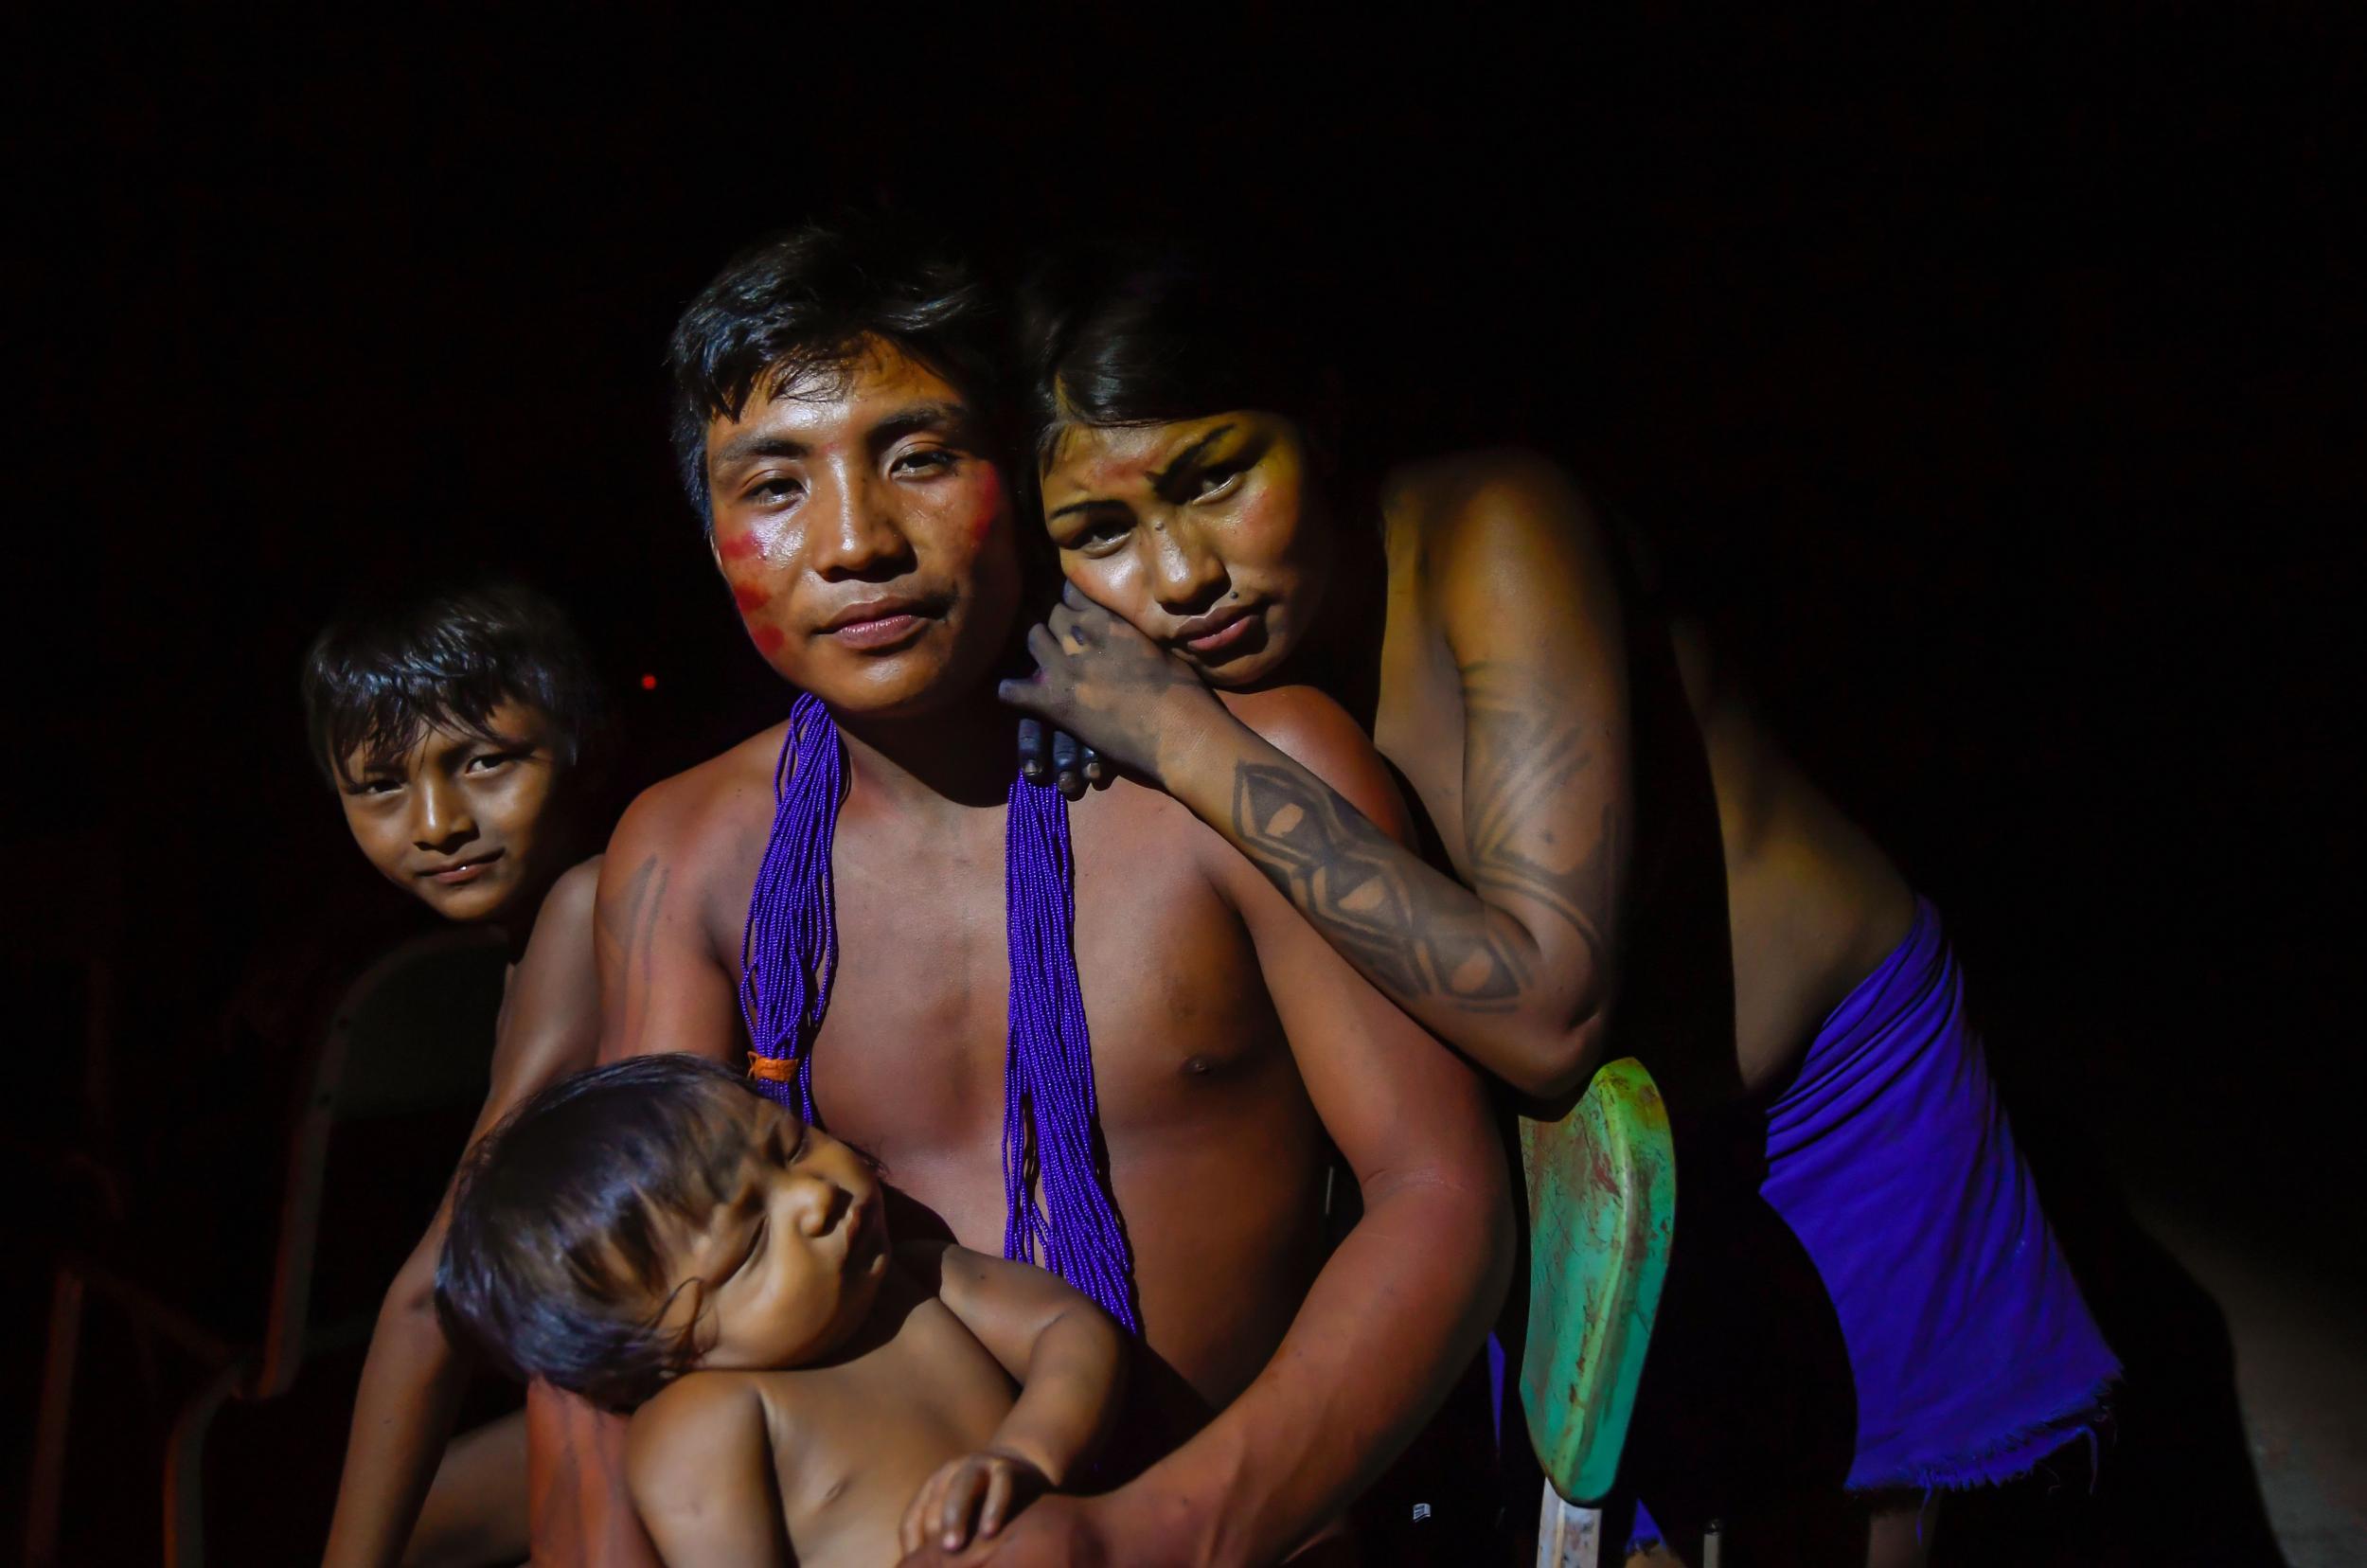 50 fascinating facts from Indigenous and tribal peoples from around the  world - Survival International